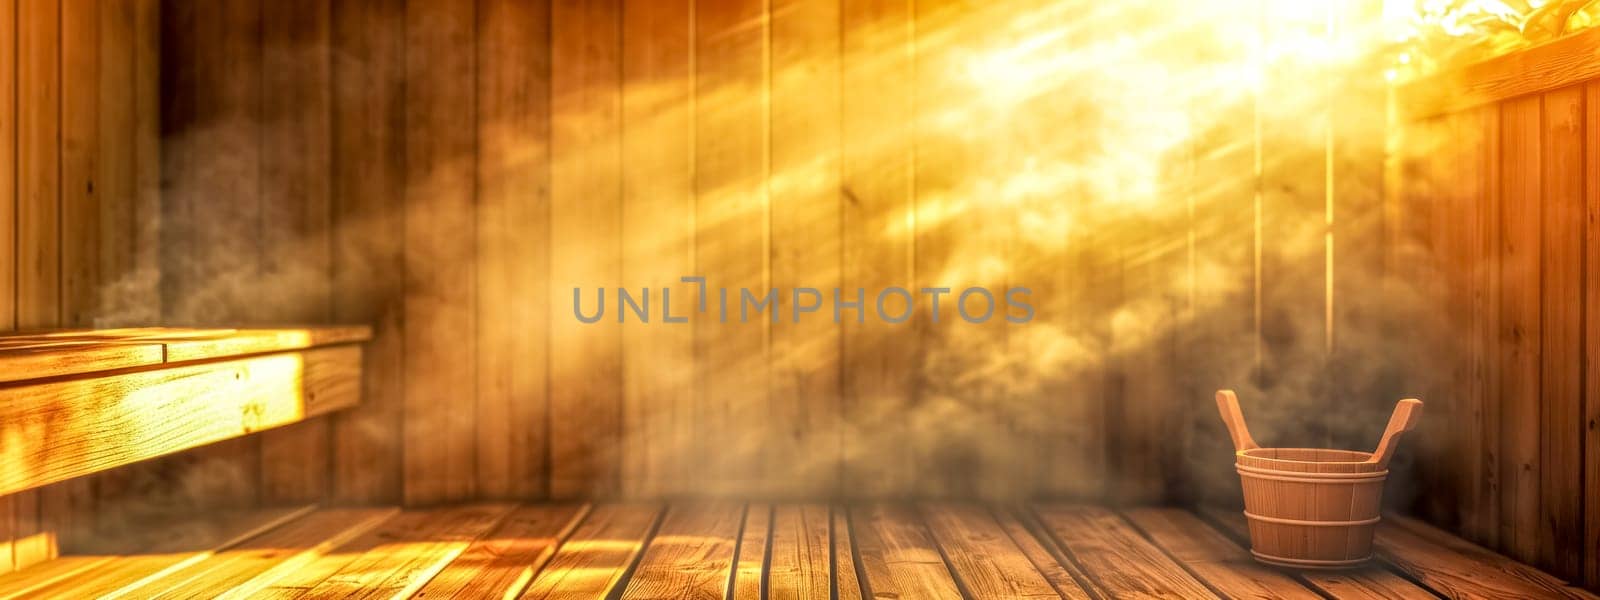 warm, inviting atmosphere of a sauna with rays of sunlight filtering through the steam, illuminating the wooden interior and a traditional sauna bucket in the foreground, evoking relaxation well-being